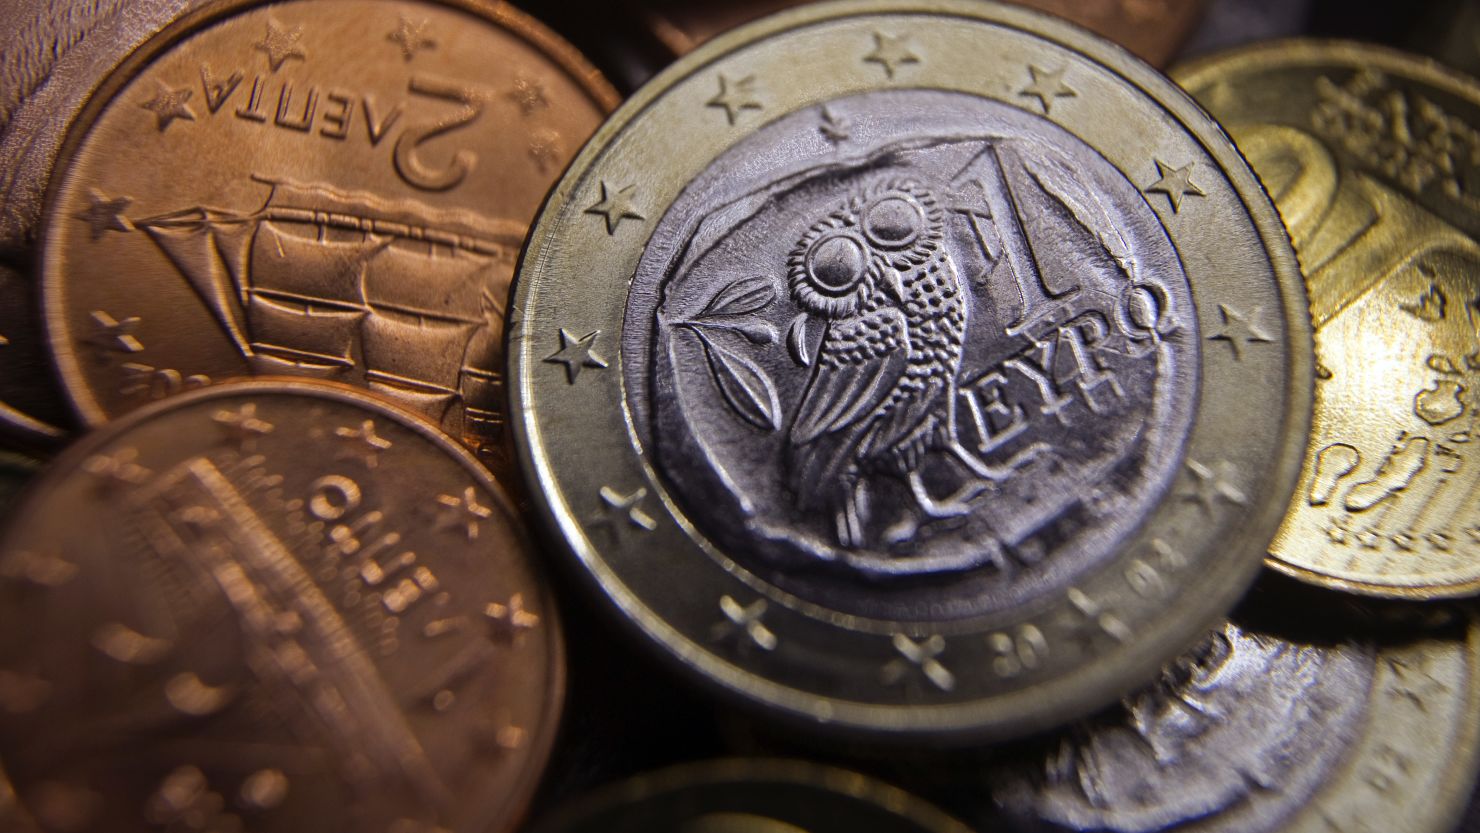 There are continuing concerns that Greece's economic woes could have a major impact on the euro.